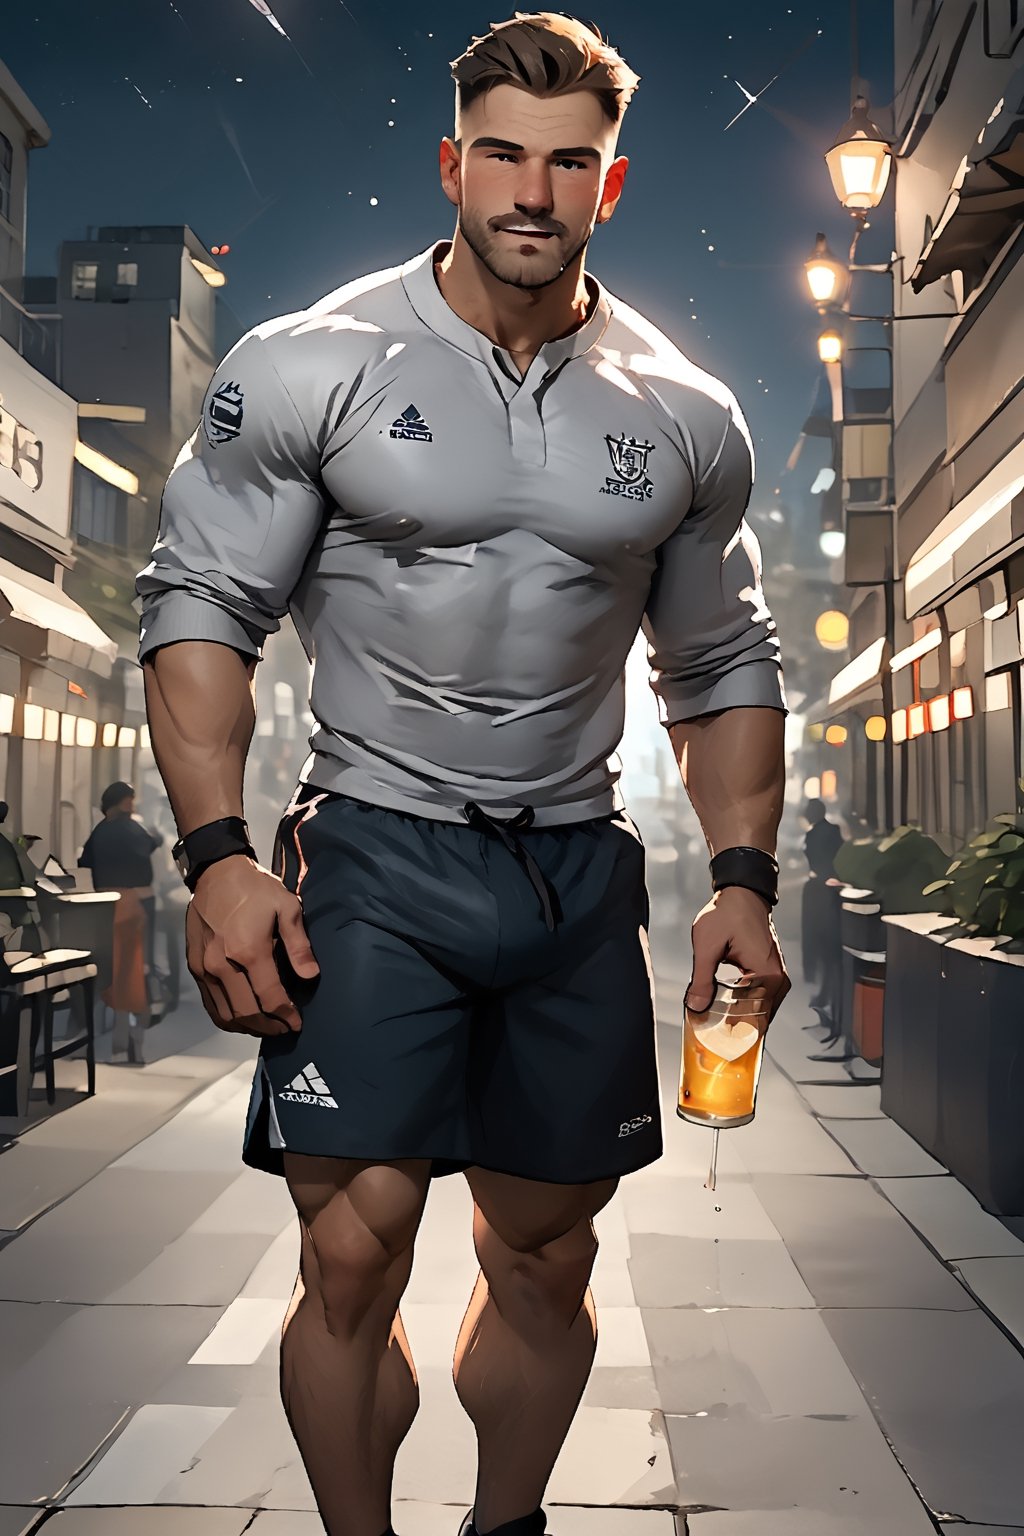 SCORE_9, SCORE_8_UP, 1BOY, MATURE MALE, SPORTSWEAR, SHIRT, SHORTS, AT THE GYM, DRINK, BLUSHES, DRUNK, MUSCULAR, SHORT HAIR, CHEERS, YATTA NE!, DROOLING FOR FUN, HANDSOME, INTRICATE EYES, MANLY MALE, 3D, CEL-SHADING, SOURCE_ANIME, RATING_QUESTIONABLE,  ,jaeggernawt